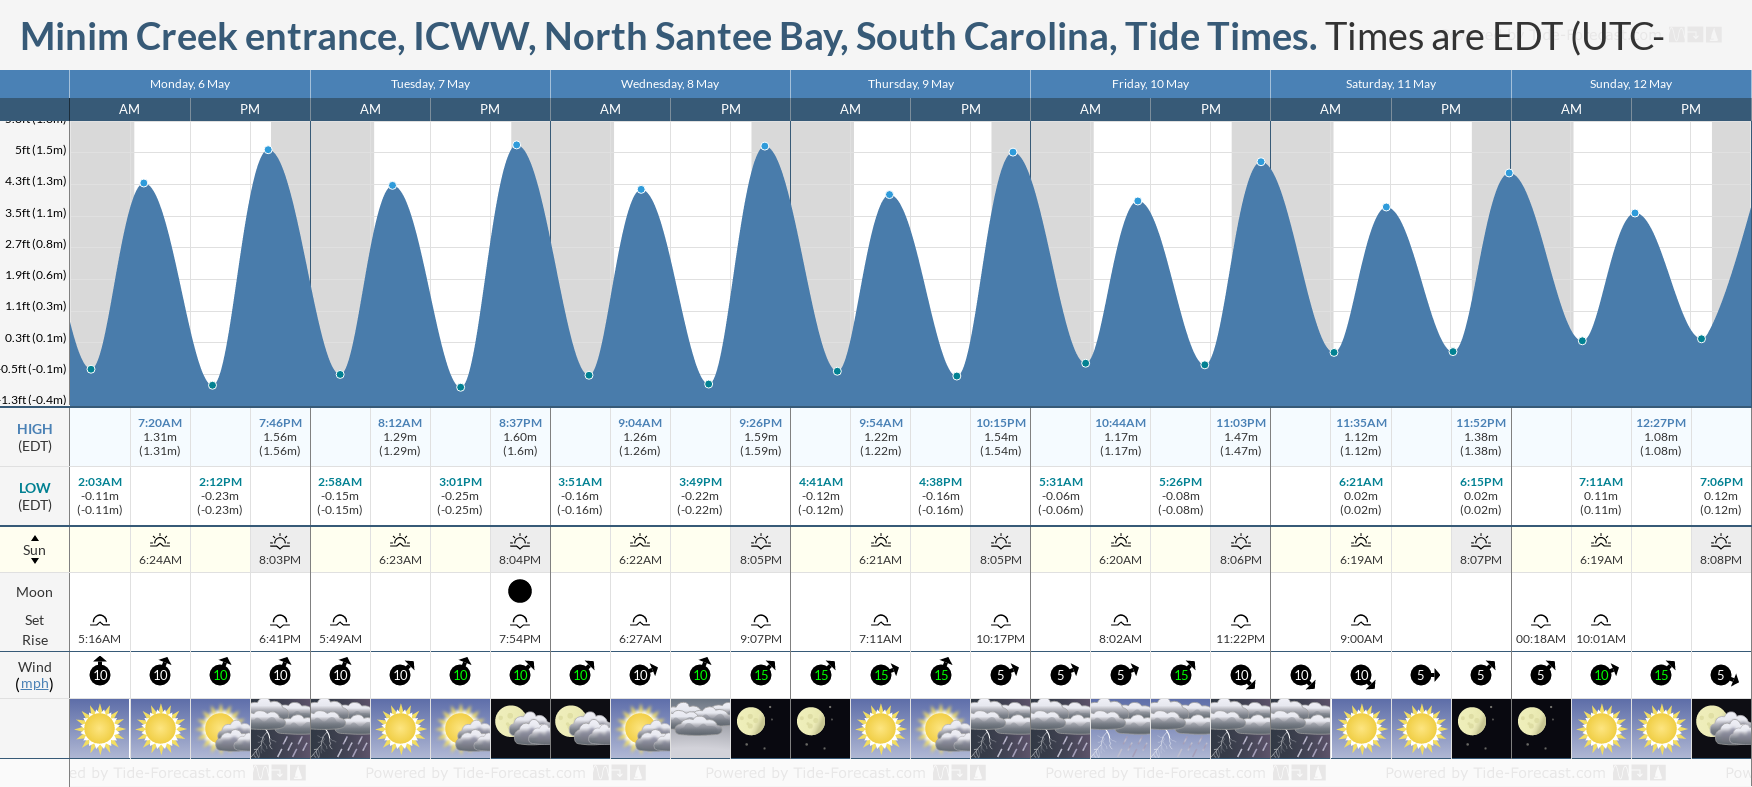 Minim Creek entrance, ICWW, North Santee Bay, South Carolina Tide Chart including high and low tide tide times for the next 7 days